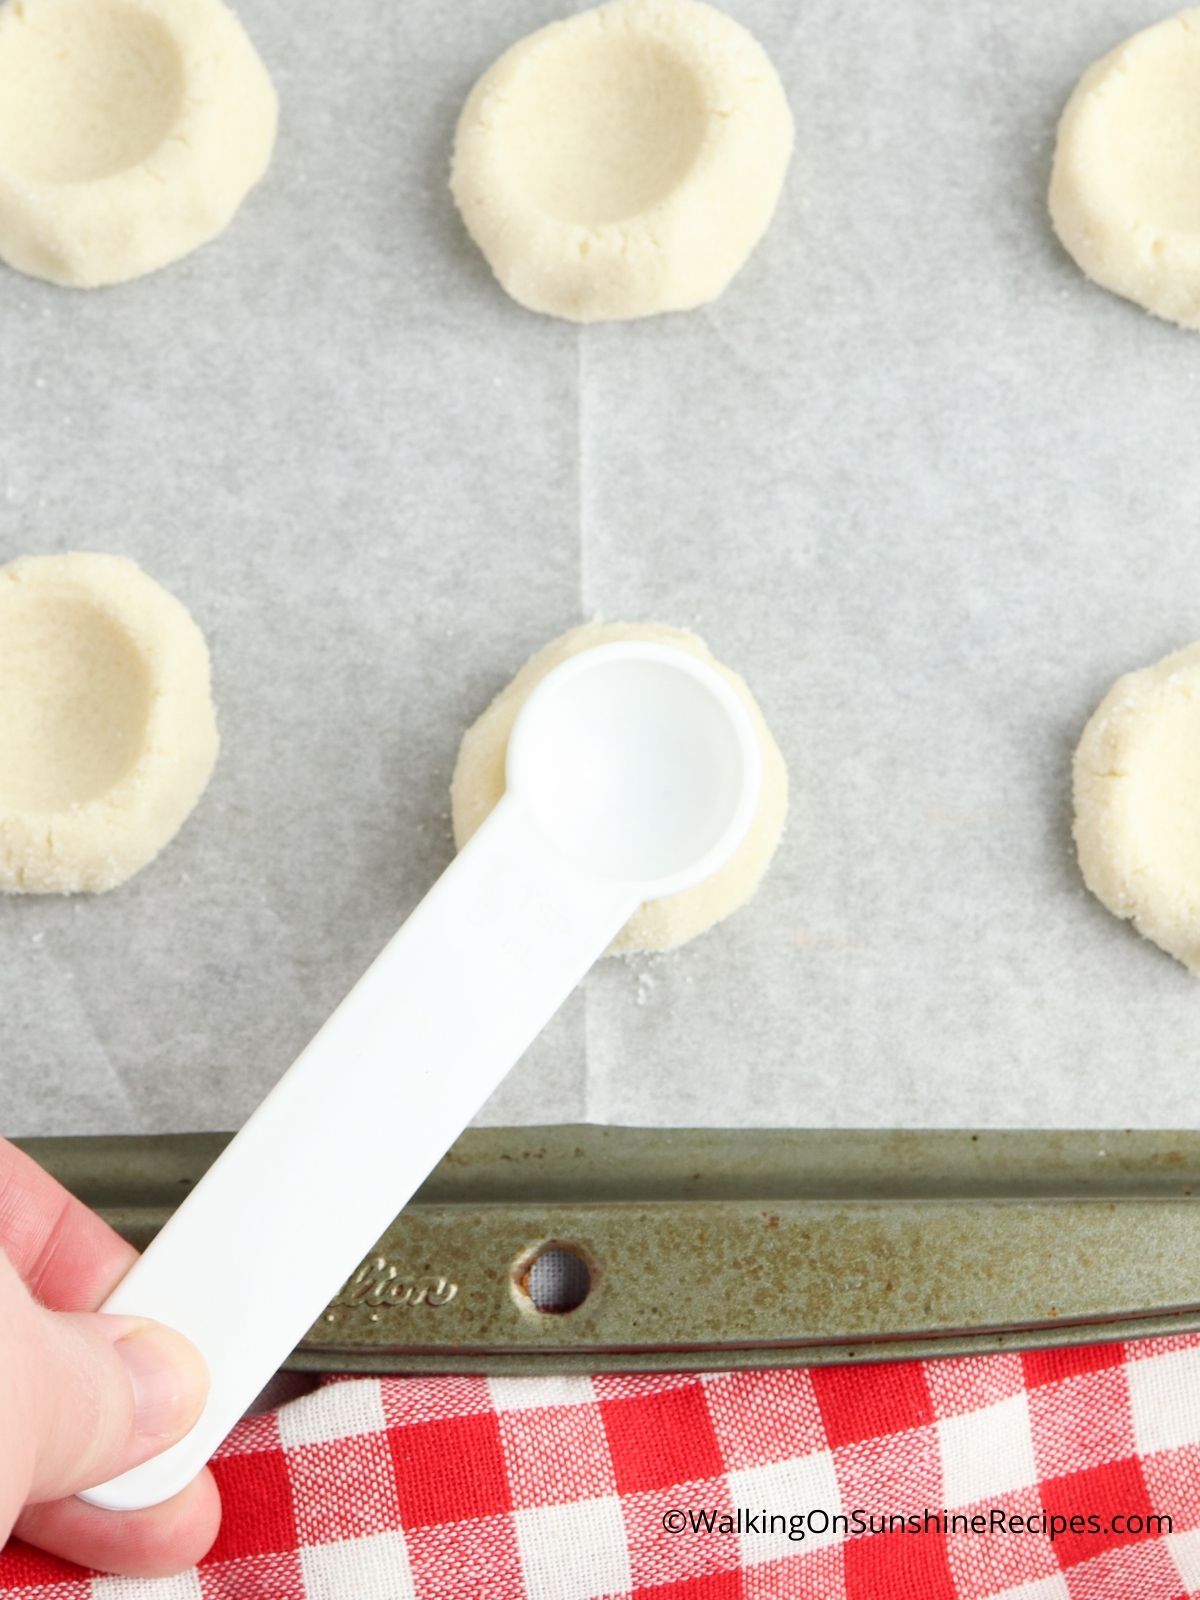 How to make a thumbprint in cookie dough.